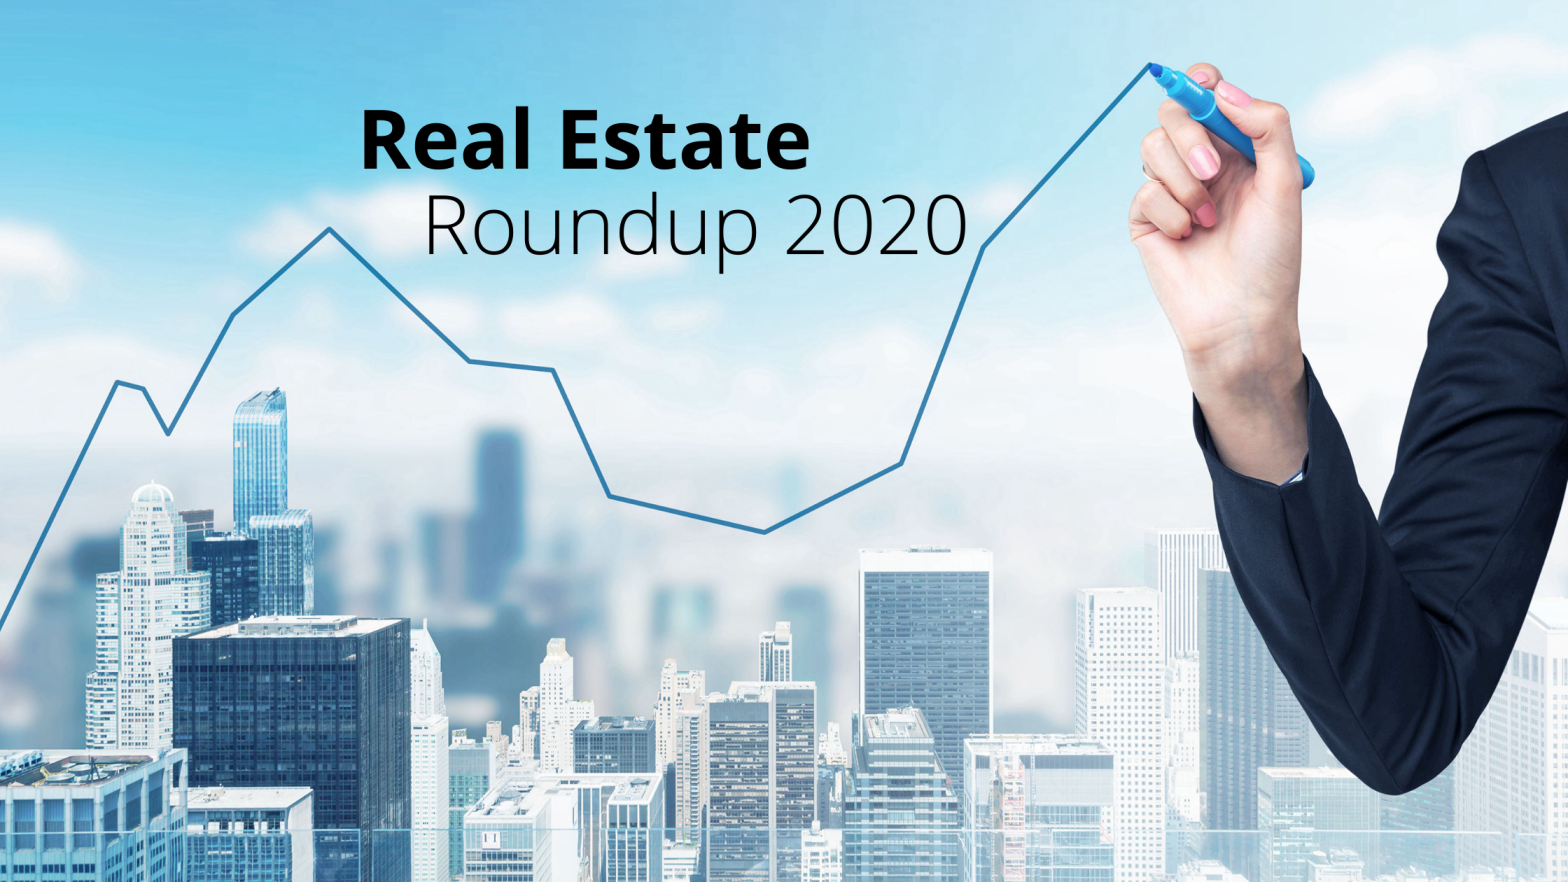 Real Estate Roundup 2020 and a changed world